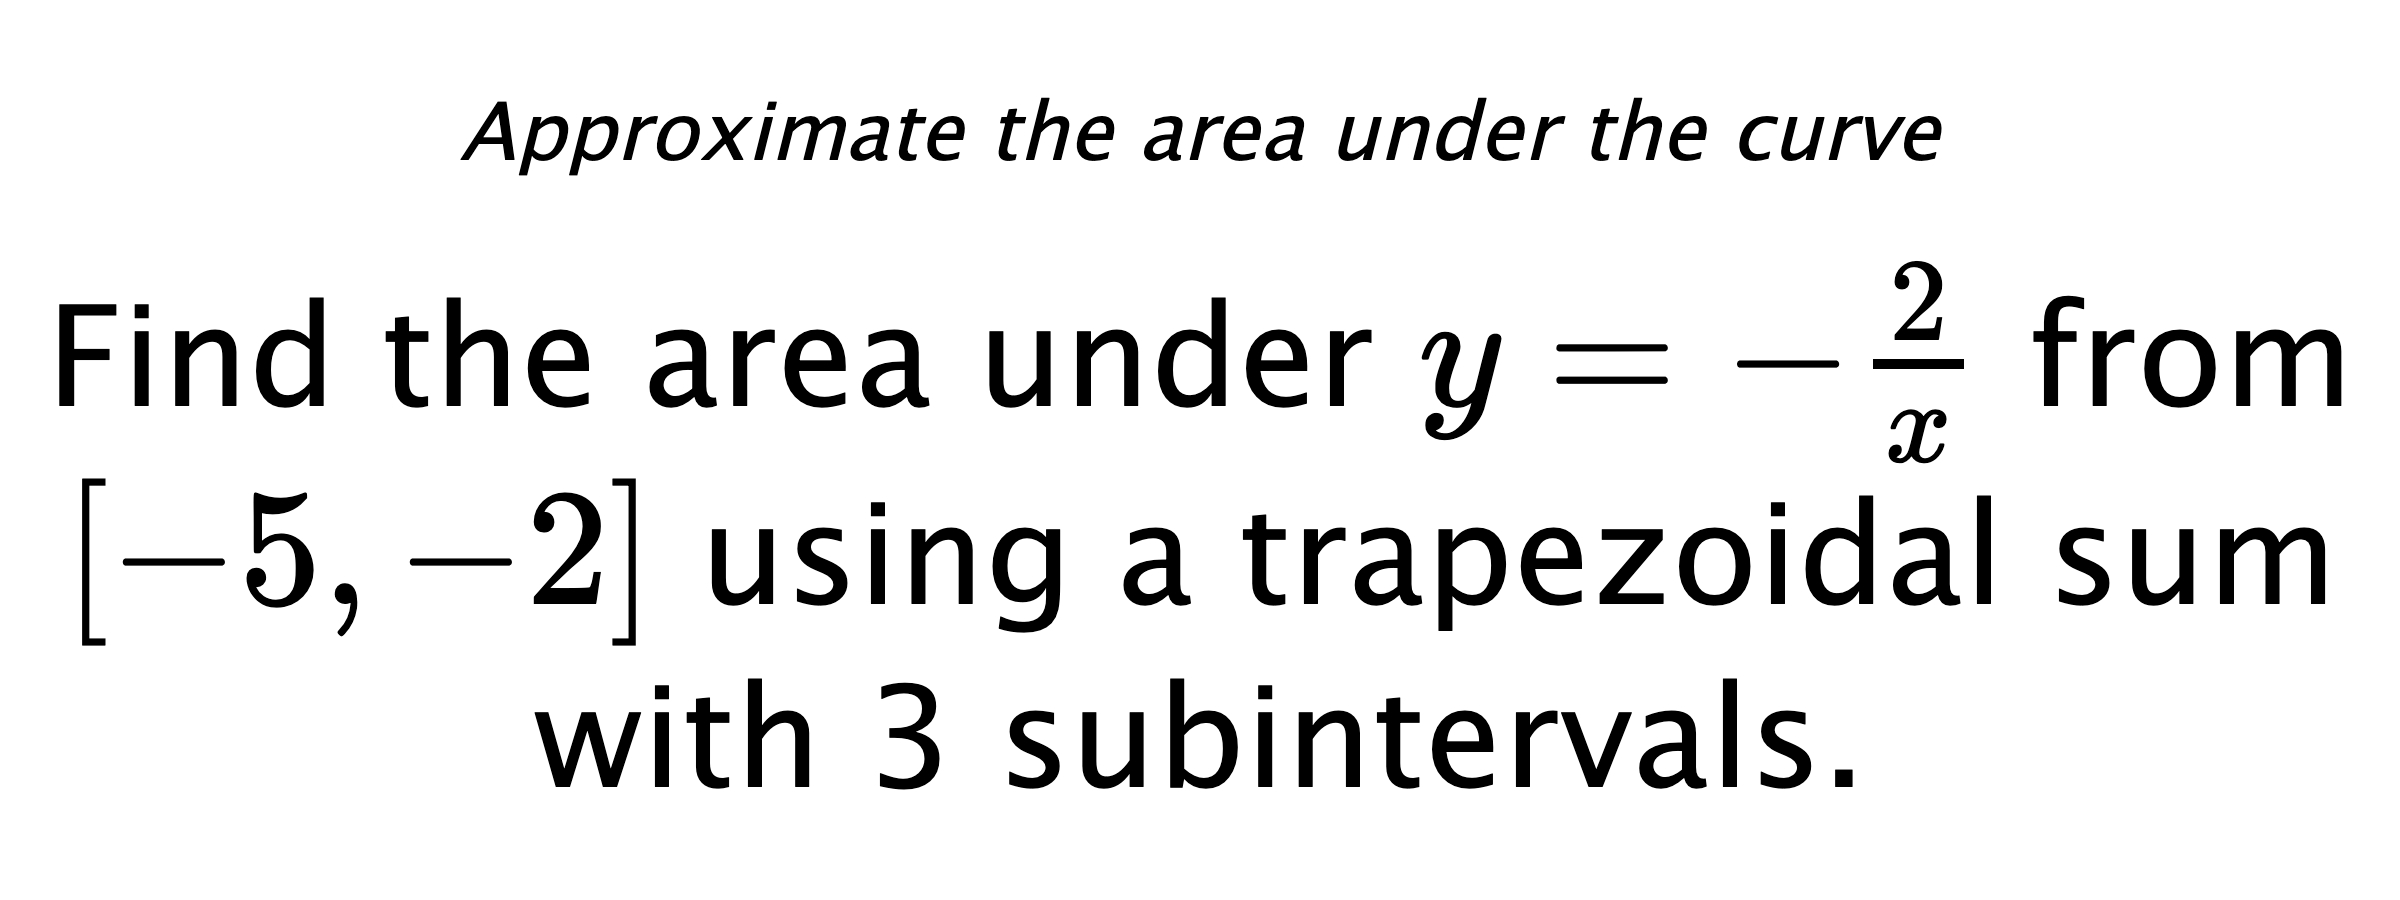 Approximate the area under the curve Find the area under $ y=-\frac{2}{x} $ from $ [-5,-2] $ using a trapezoidal sum with 3 subintervals.